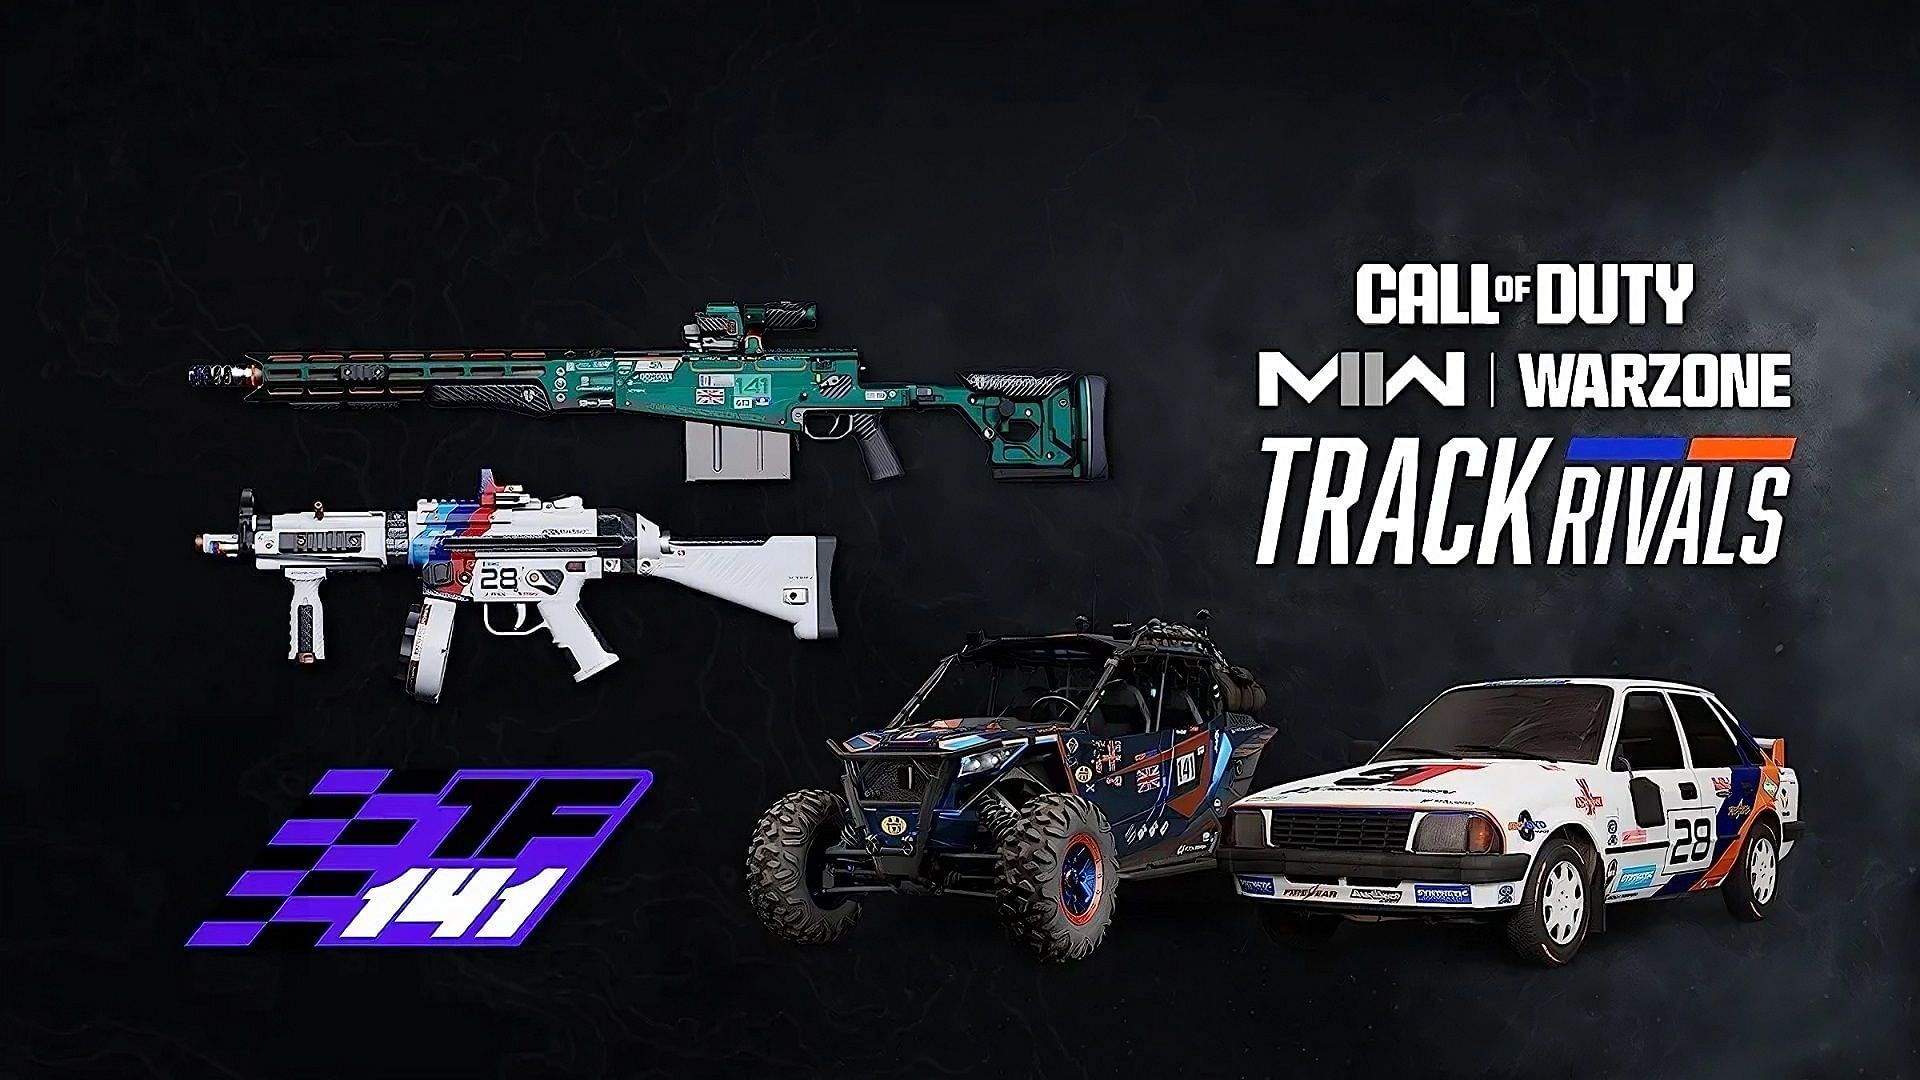 Claim 6 FREE Items NOW! (Limited Time Bundle for MW2 & Warzone with Prime  Gaming) 